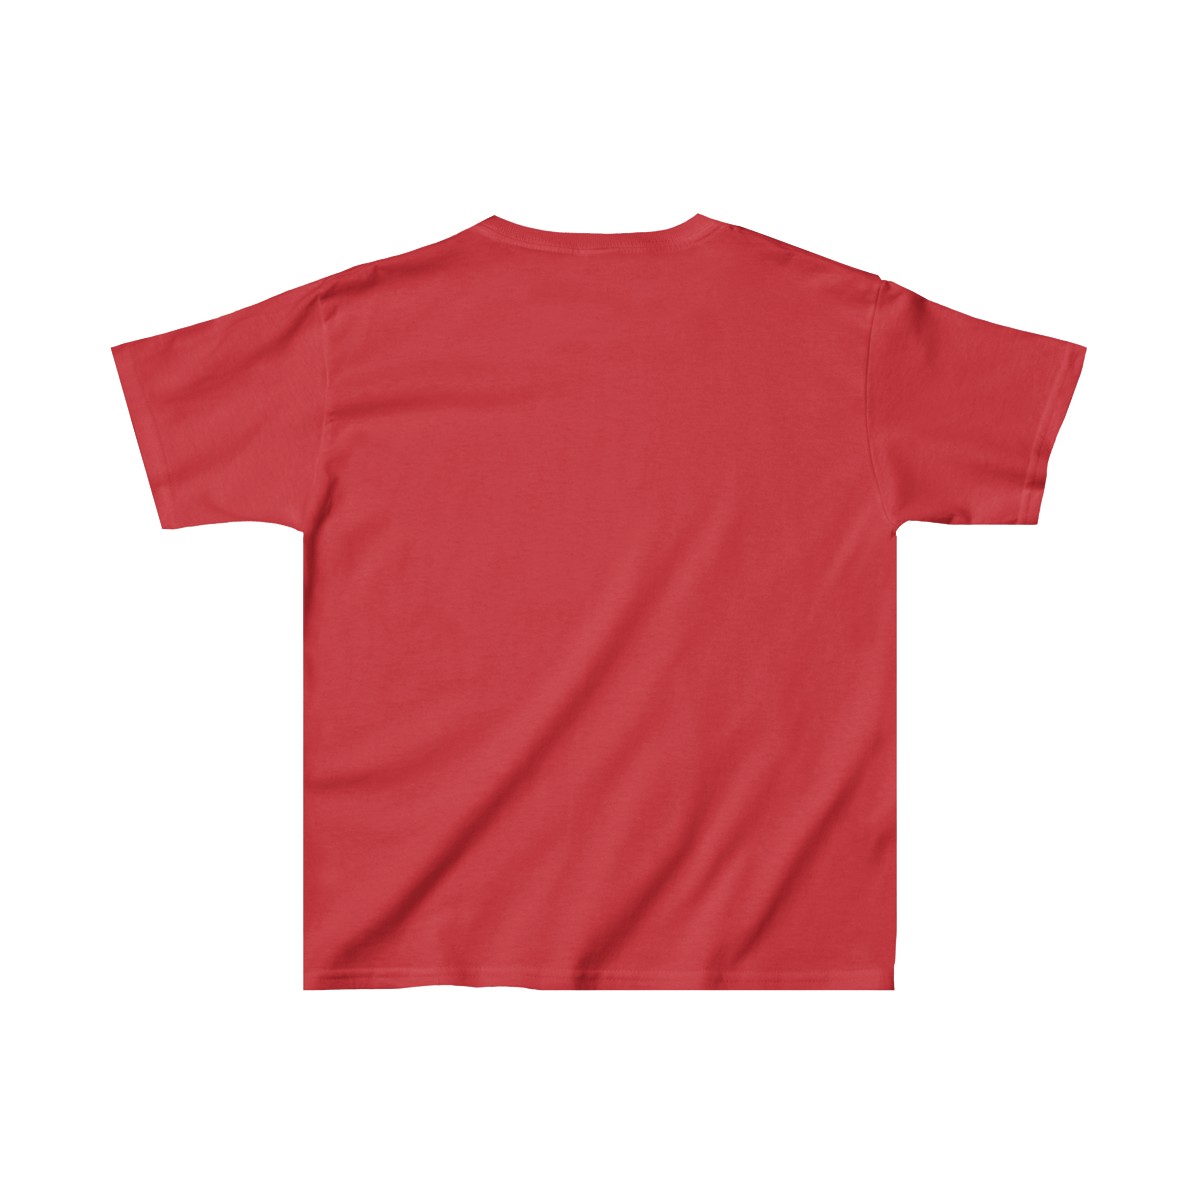 The PERCIVAL Teddy Bear Kids Tee from FURocious (tm) Game  product thumbnail image